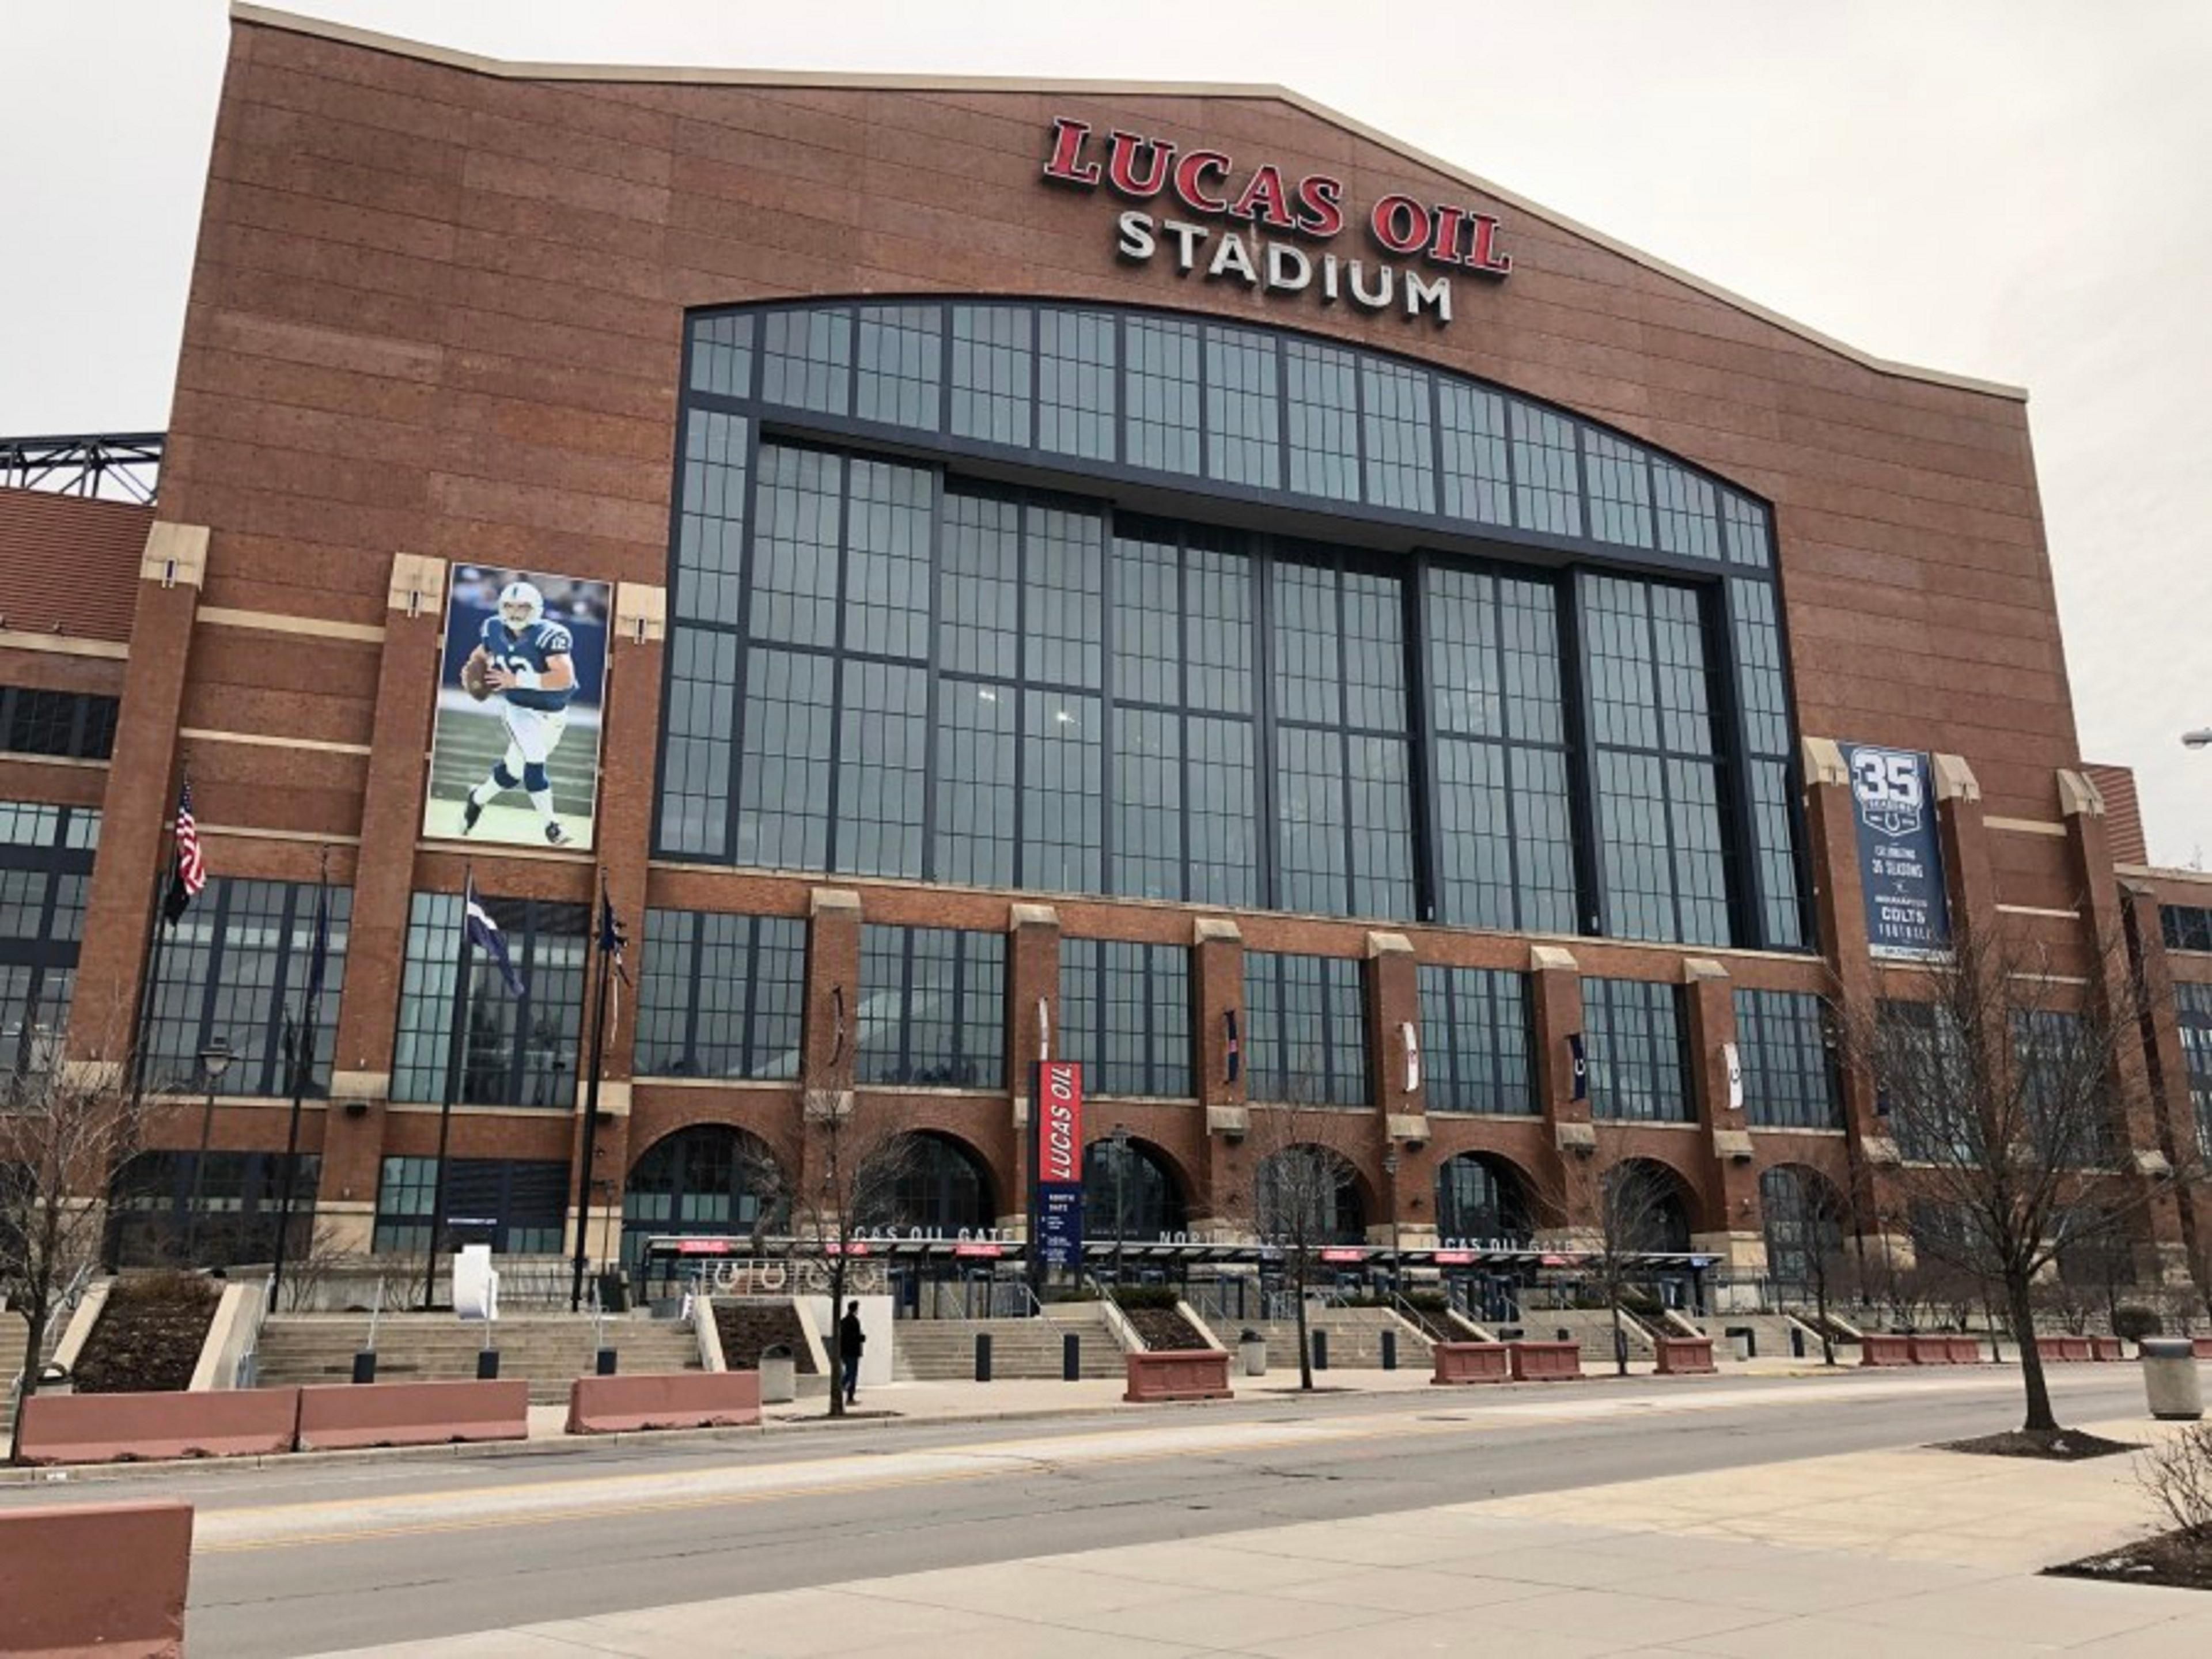 For Colts games, concerts, and Lucas Stadium events, stay at the Holiday Inn Indianapolis Downtown. We are just a short 4-minute walk from the front door! Pre-game and post-game celebrations in Champs Bar. We are the perfect home base for all Lucas Oil Stadium events.